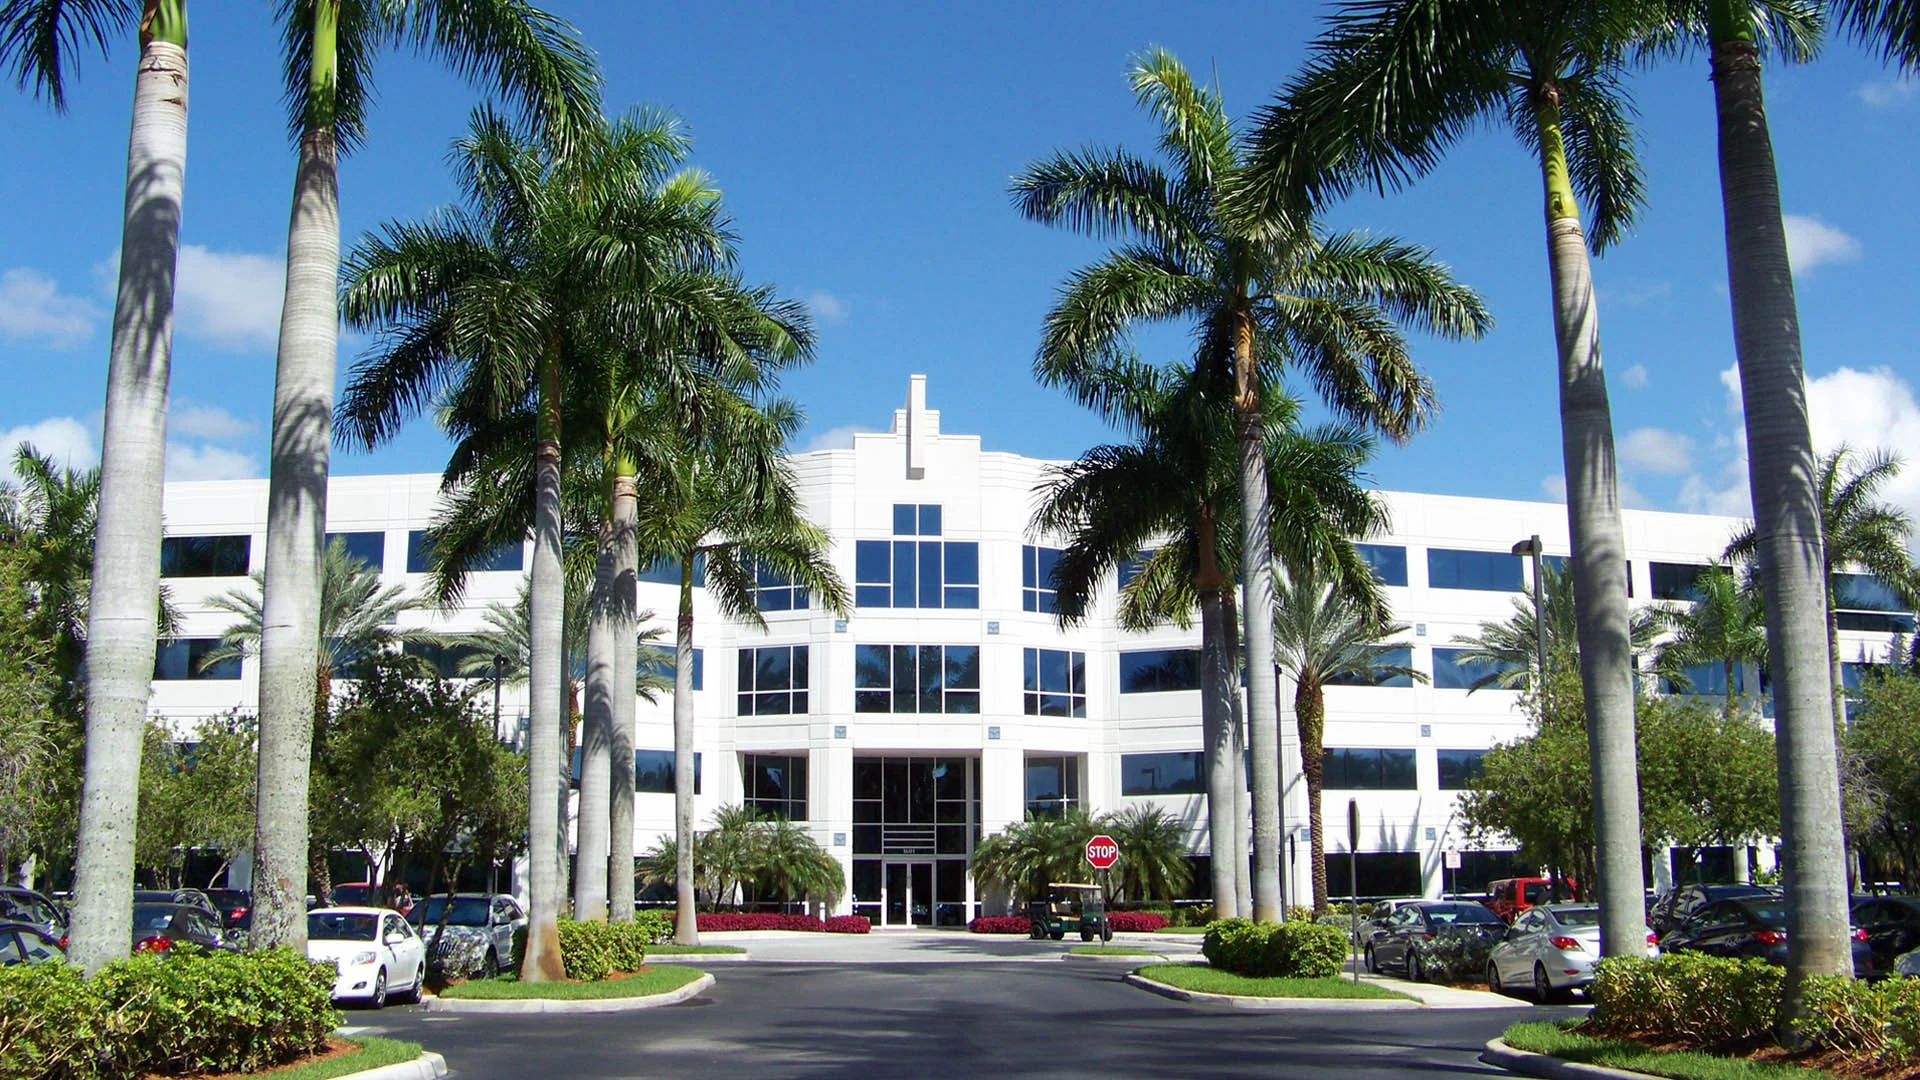 Commercial property in Davie, FL maintained by BTS Land Services Corp.